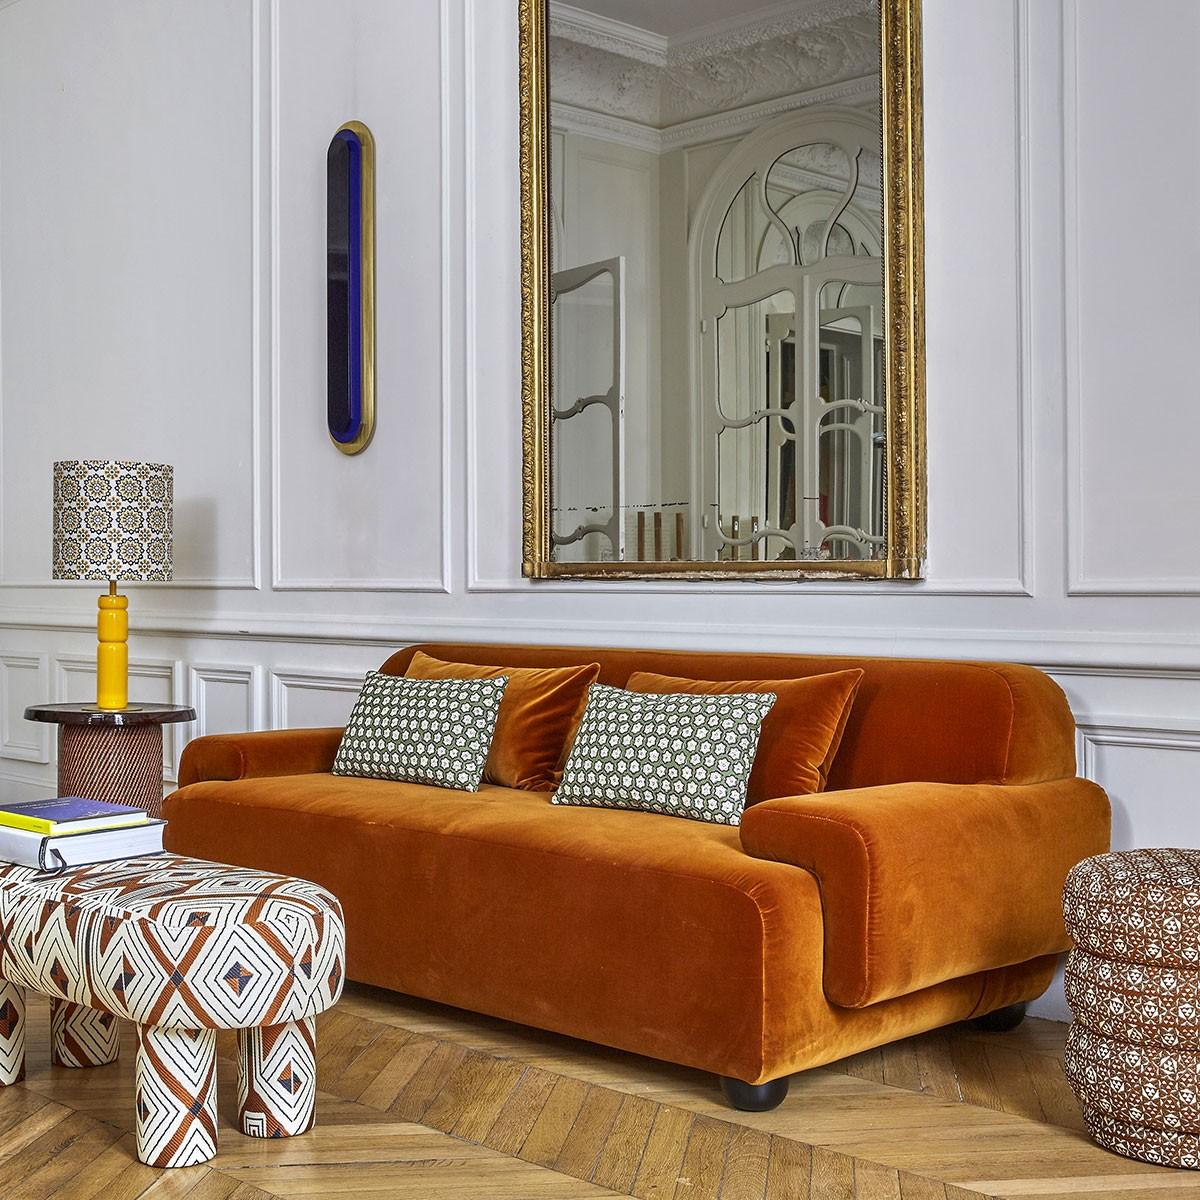 Popus Editions Lena 2.5 seater sofa in Yellow Verone Velvet Upholstery

It looks like it's straight out of a movie, with its generous curves and wide armrests. It is a real invitation to spend long Sundays with the family, comfortably seated in